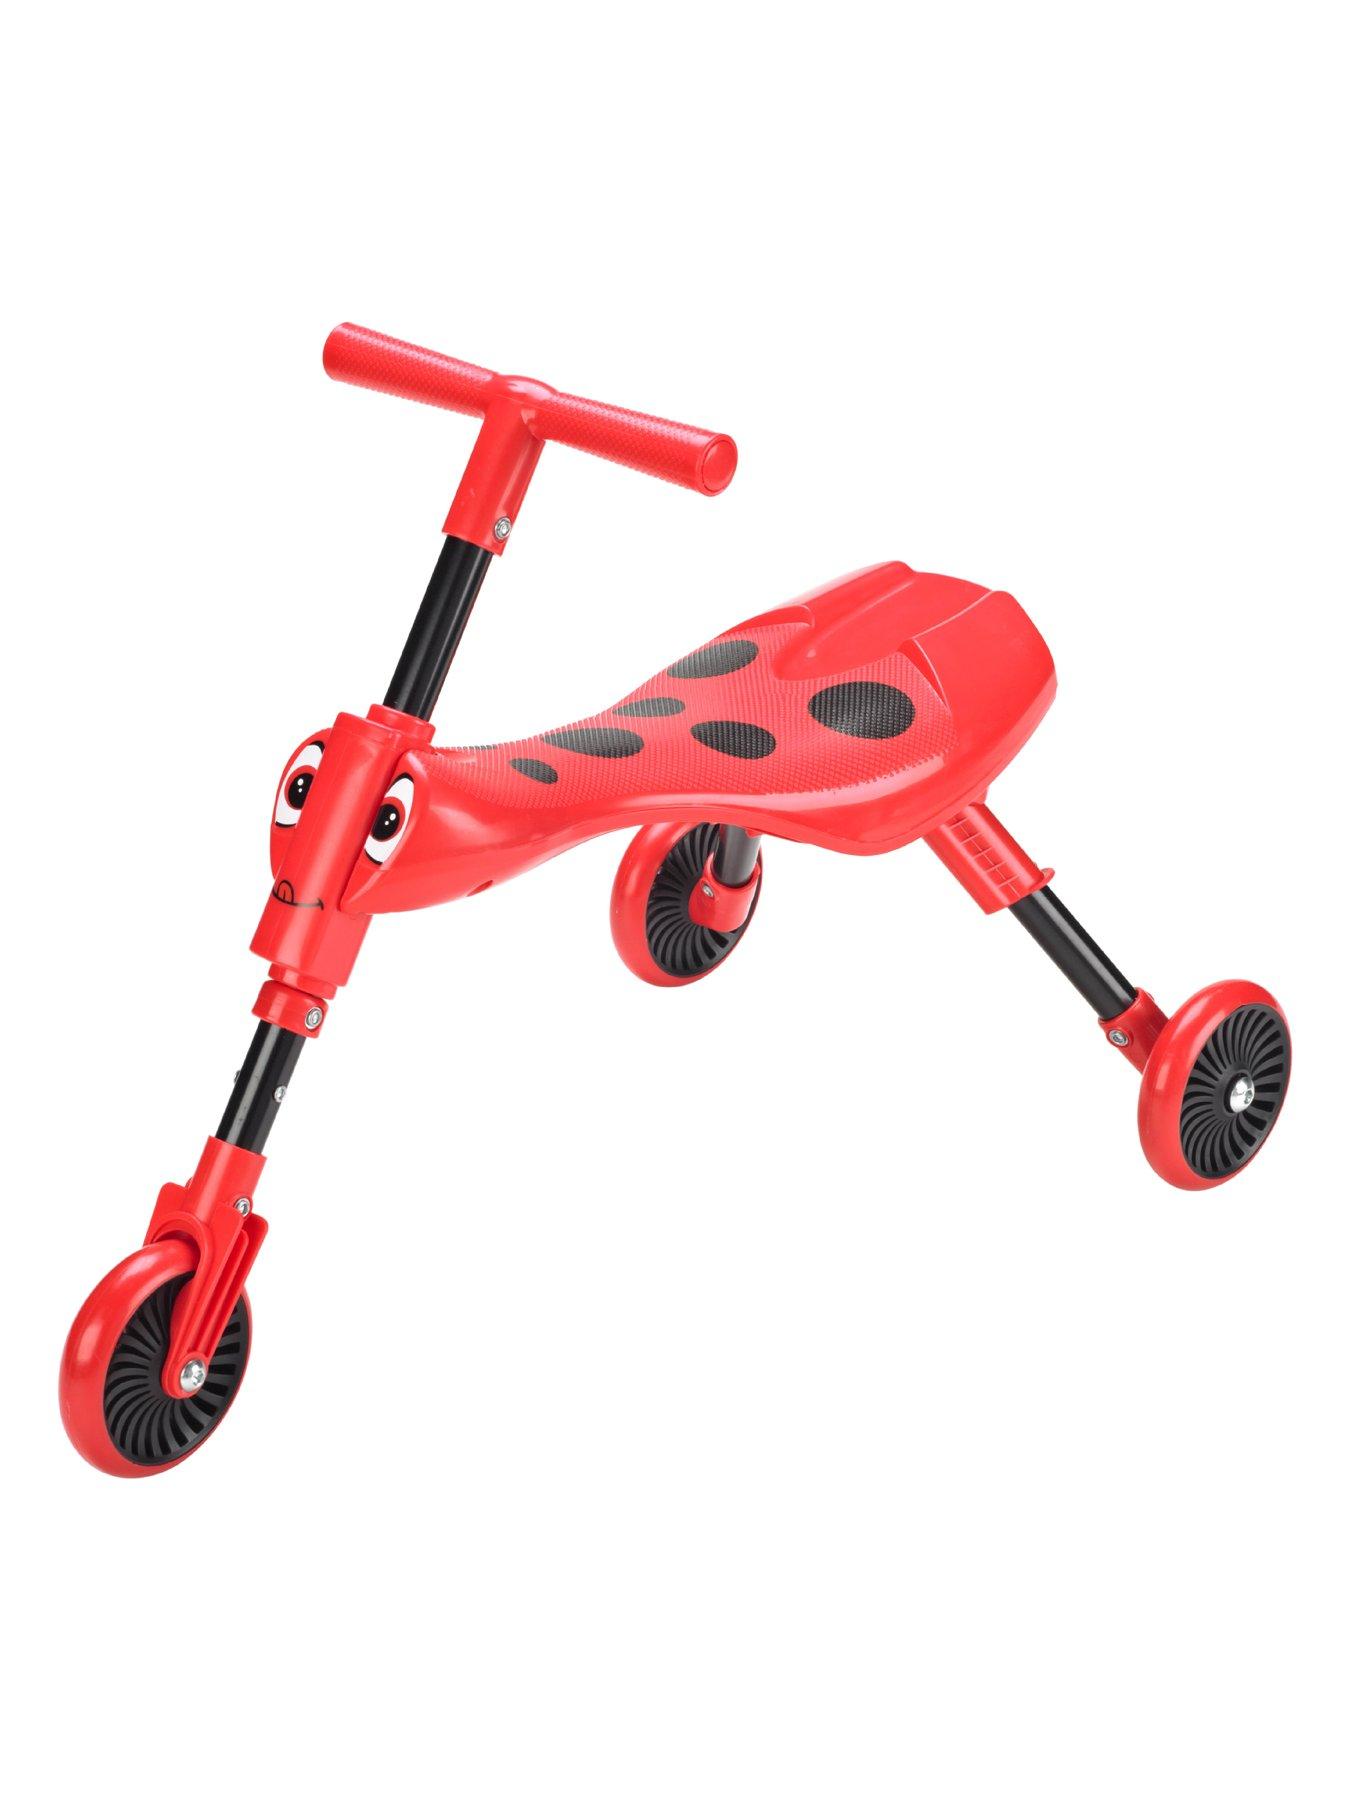 Best ride-on toys for toddlers for 2023 UK